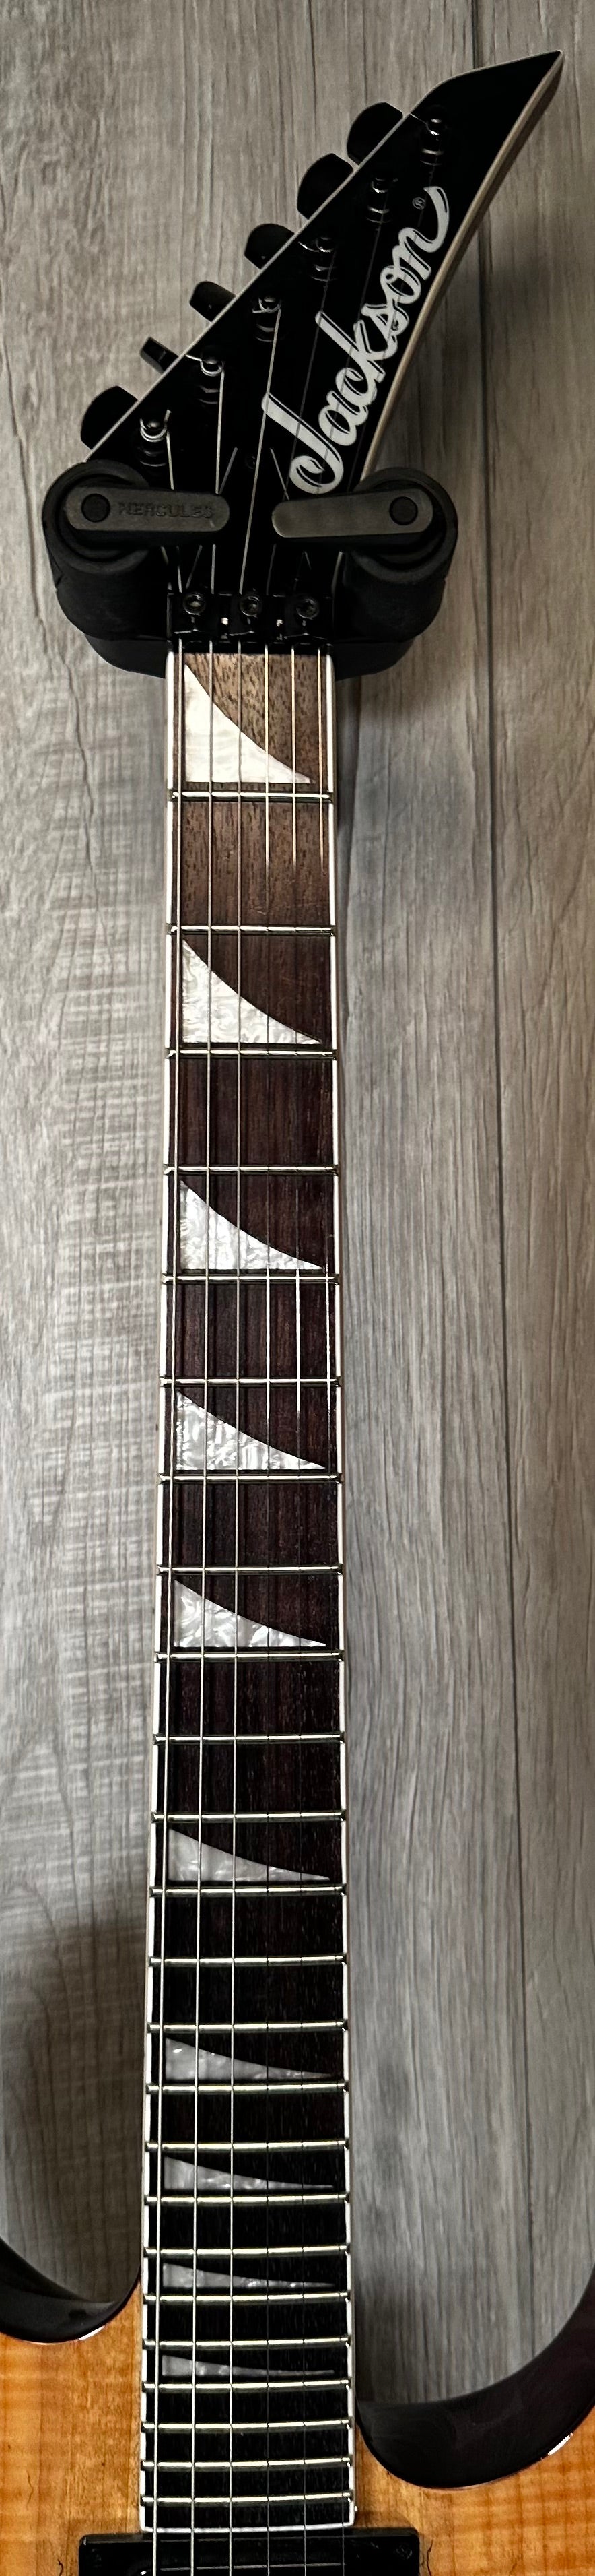 Neck view of Used 2018 Jackson X Series Soloist SLX Exotic Spalted Maple Natural 